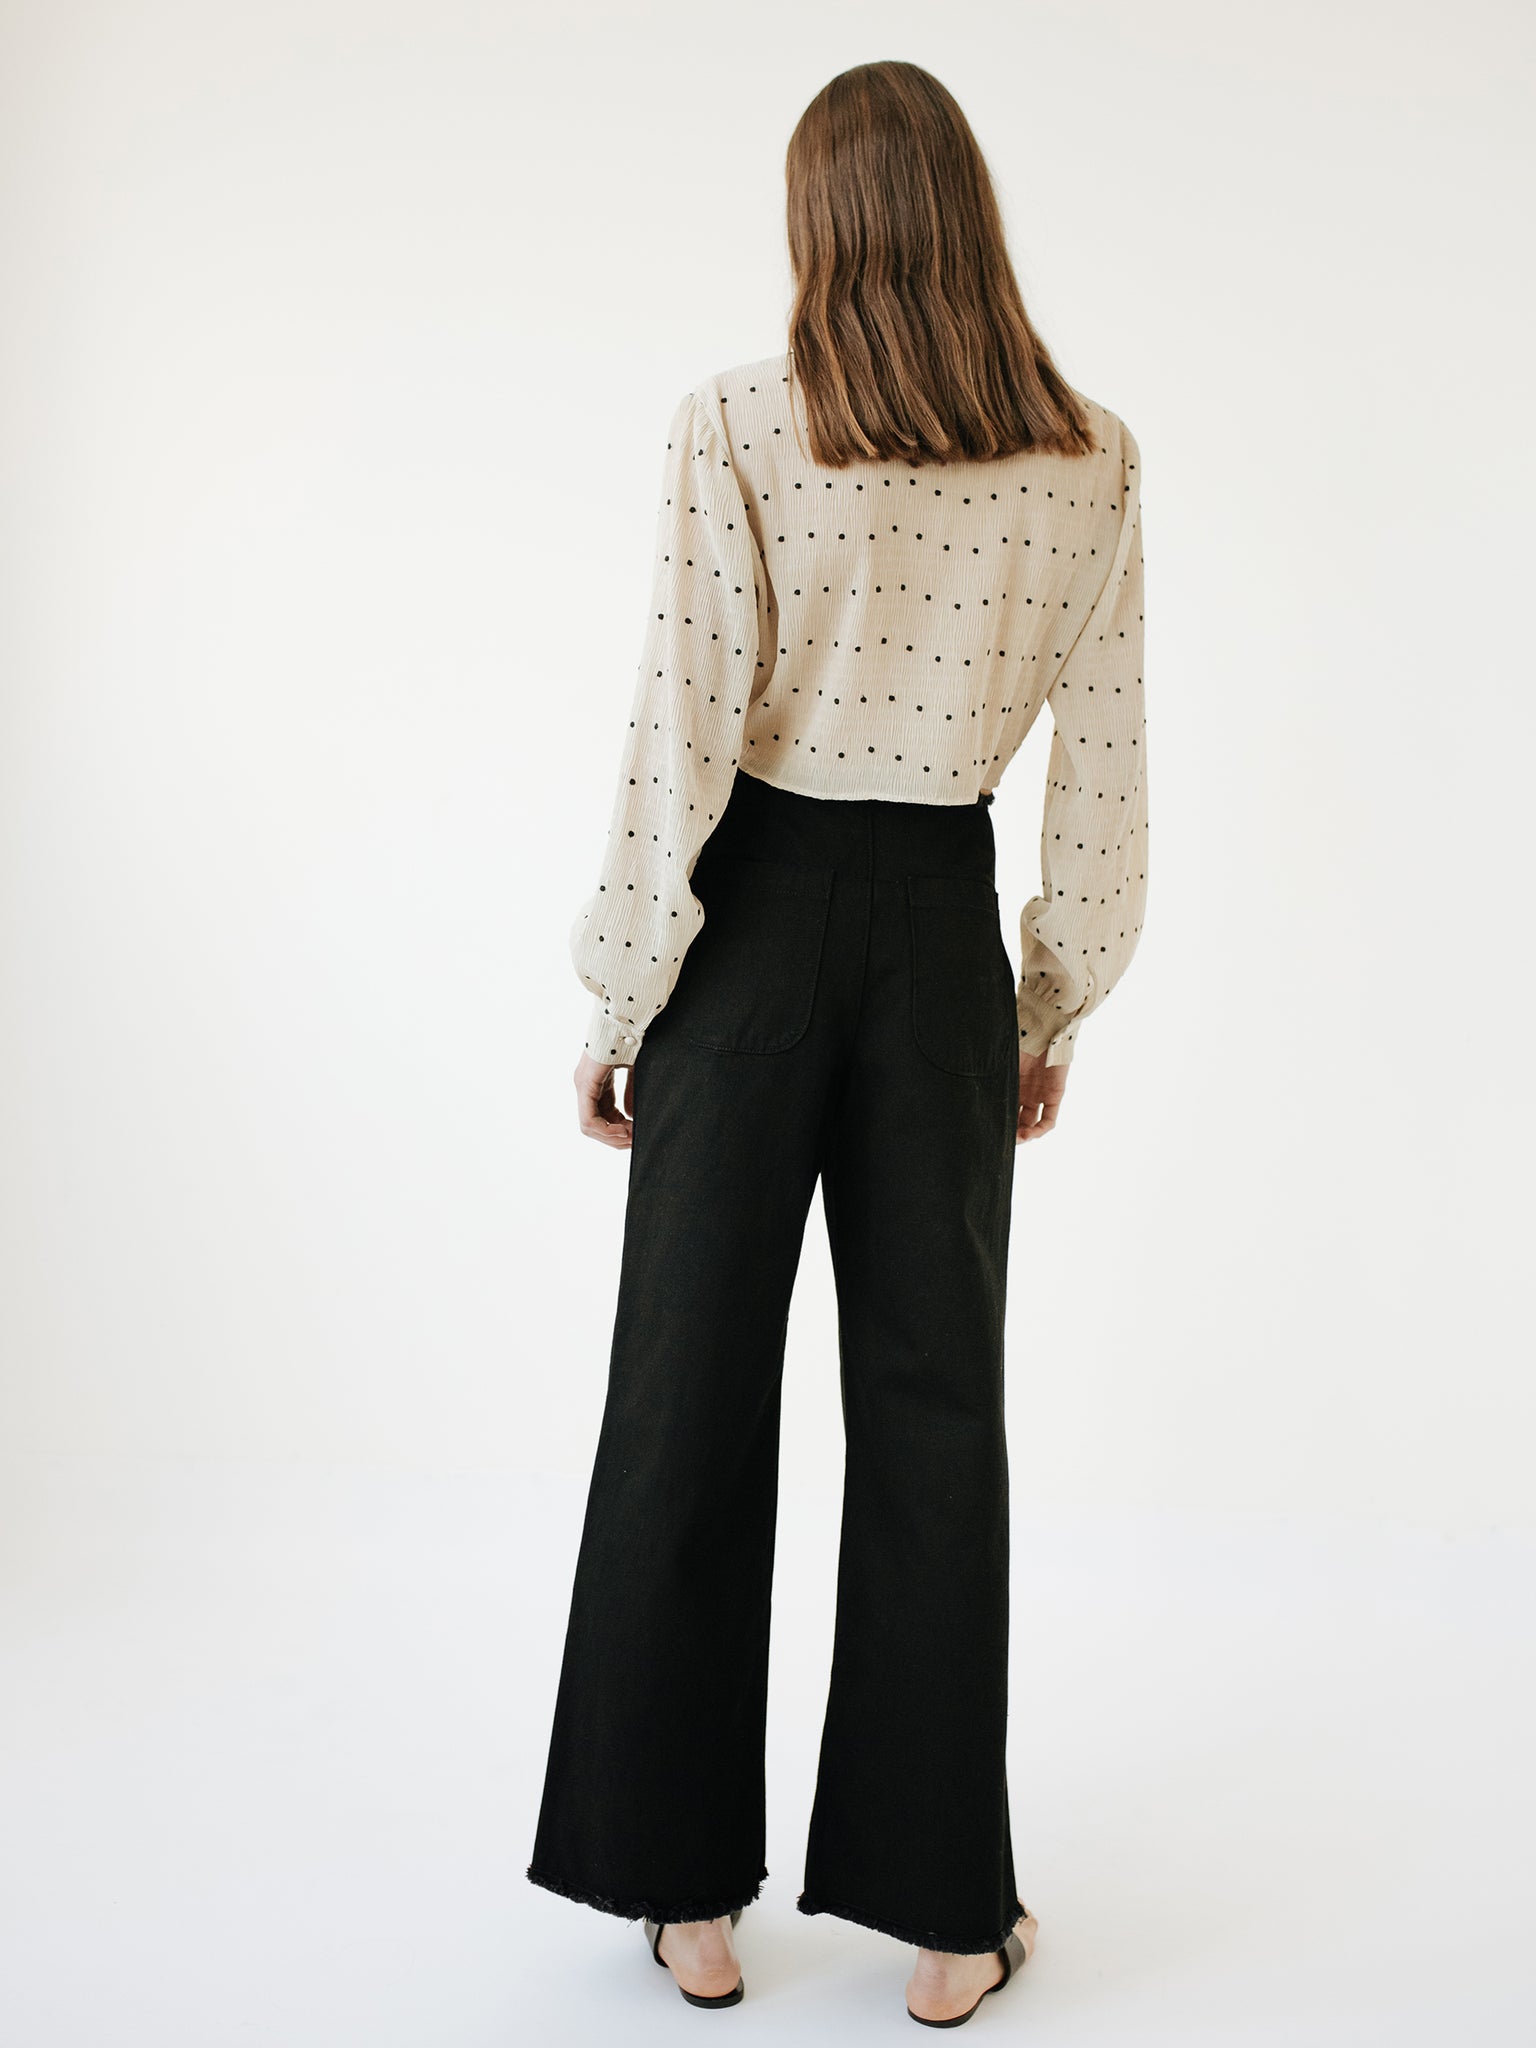 Sir the Label | Camille Tie Top in Bone Polka Dot | The UNDONE by SIR.